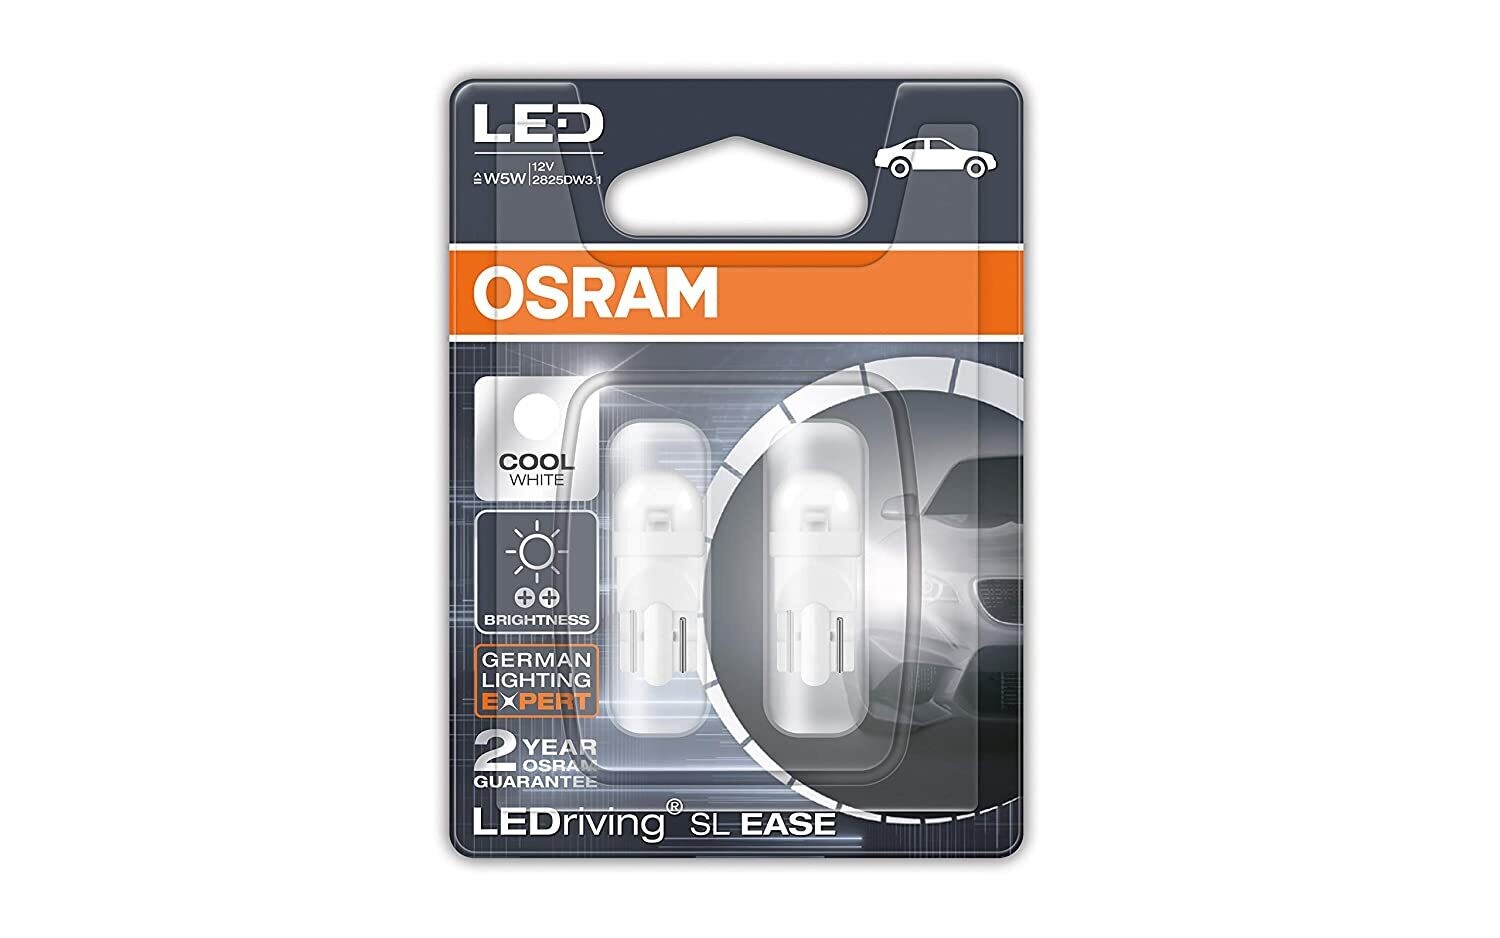 Osram LED Parking Light T10 (White, 2 Bulbs) - Also compatible with Number Plate lights